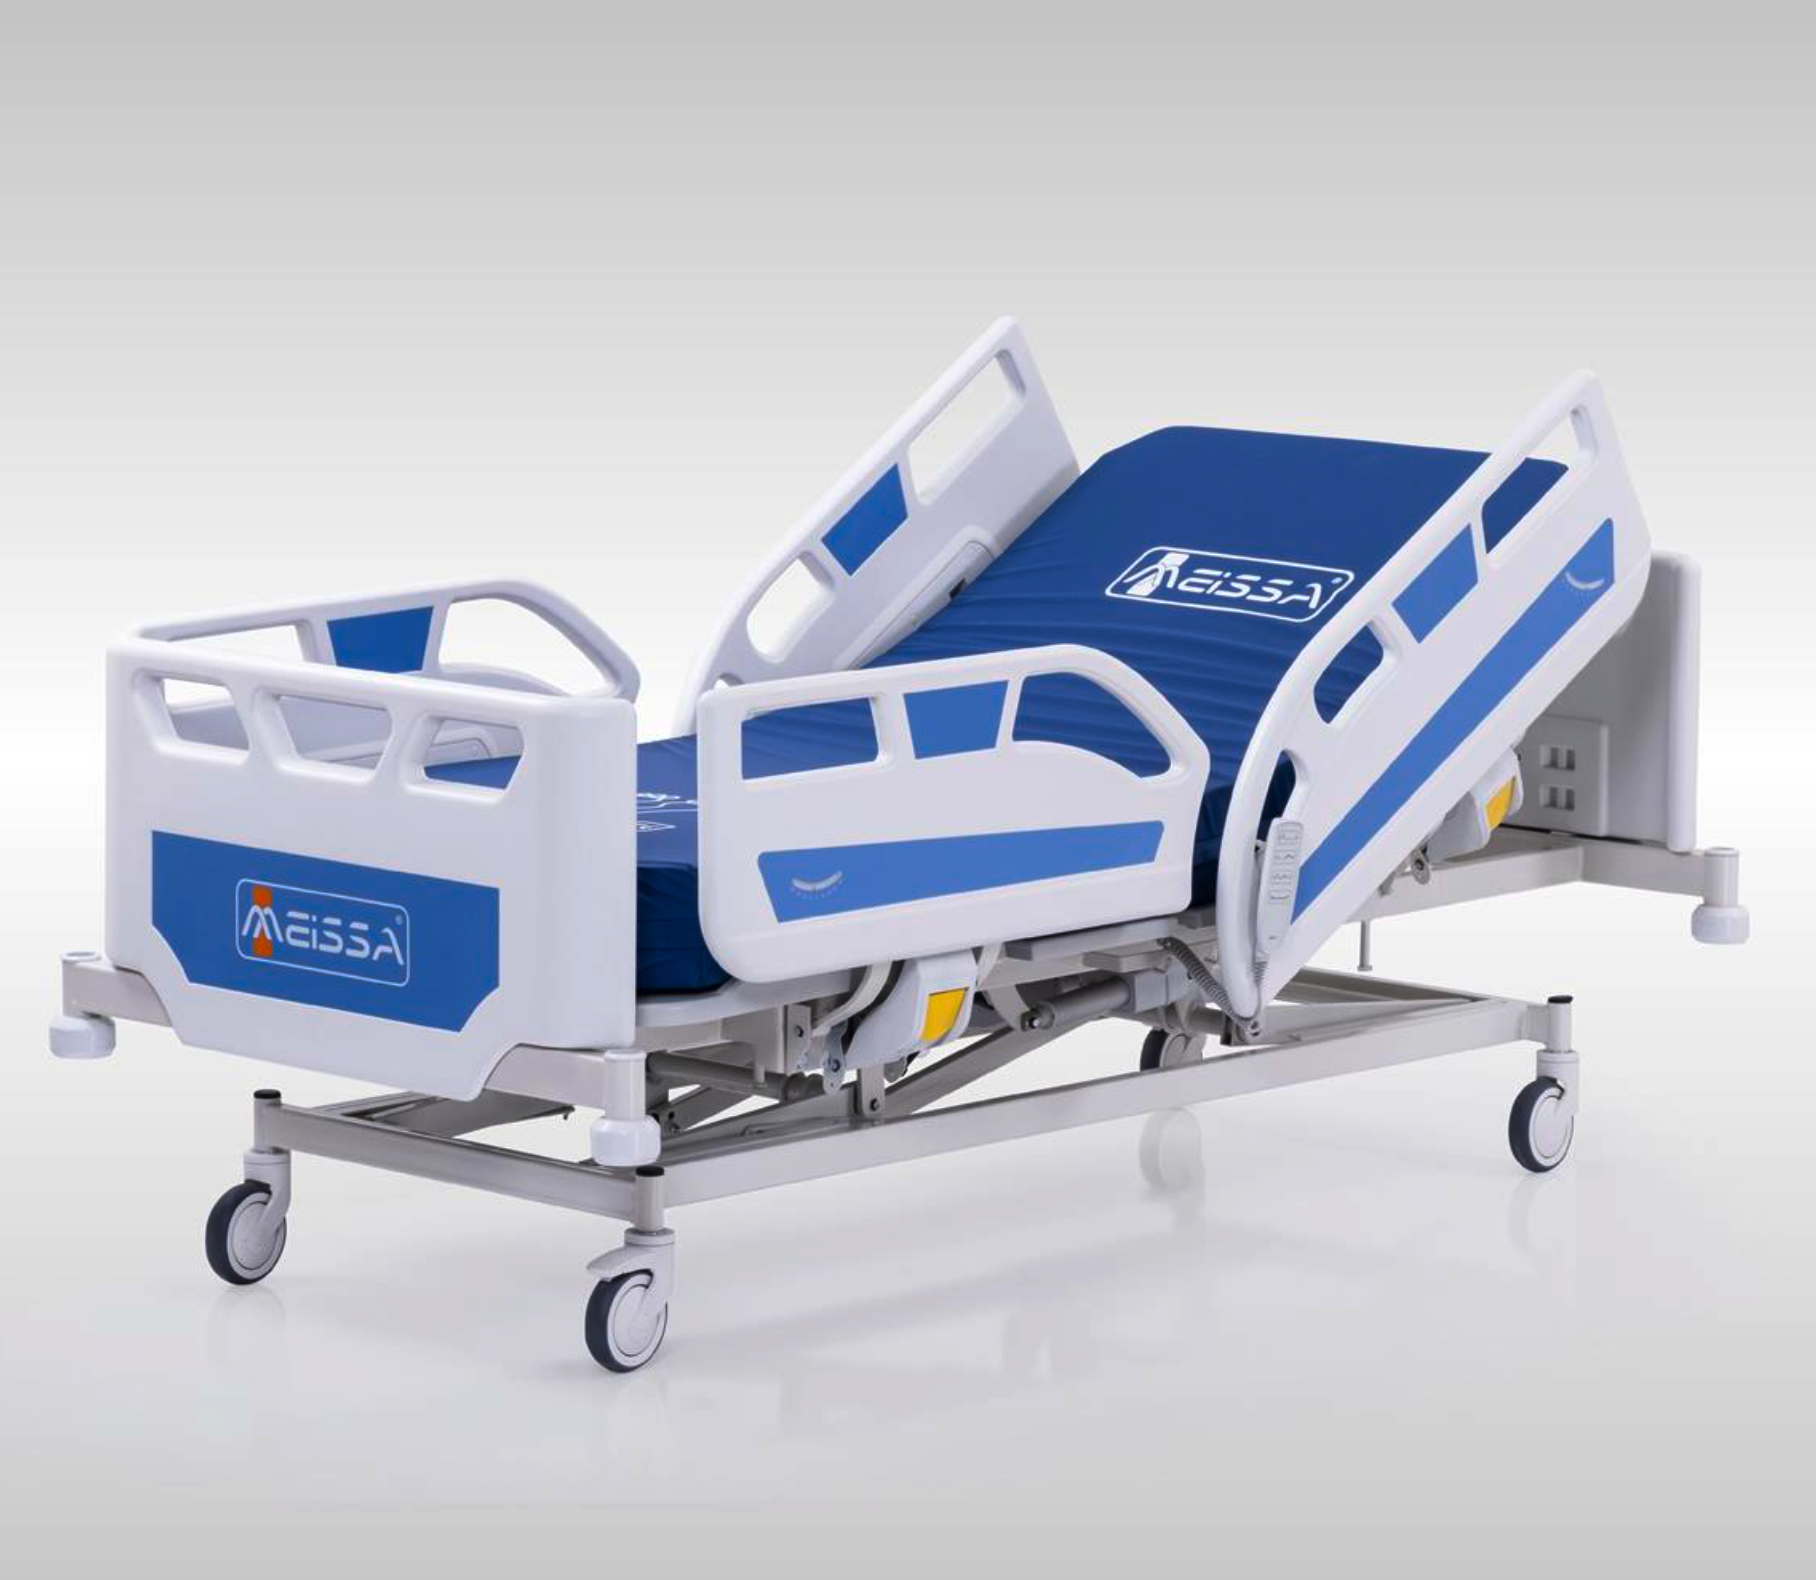 Electric Hospital Bed with Alerts Emerald 2 Air Mattress